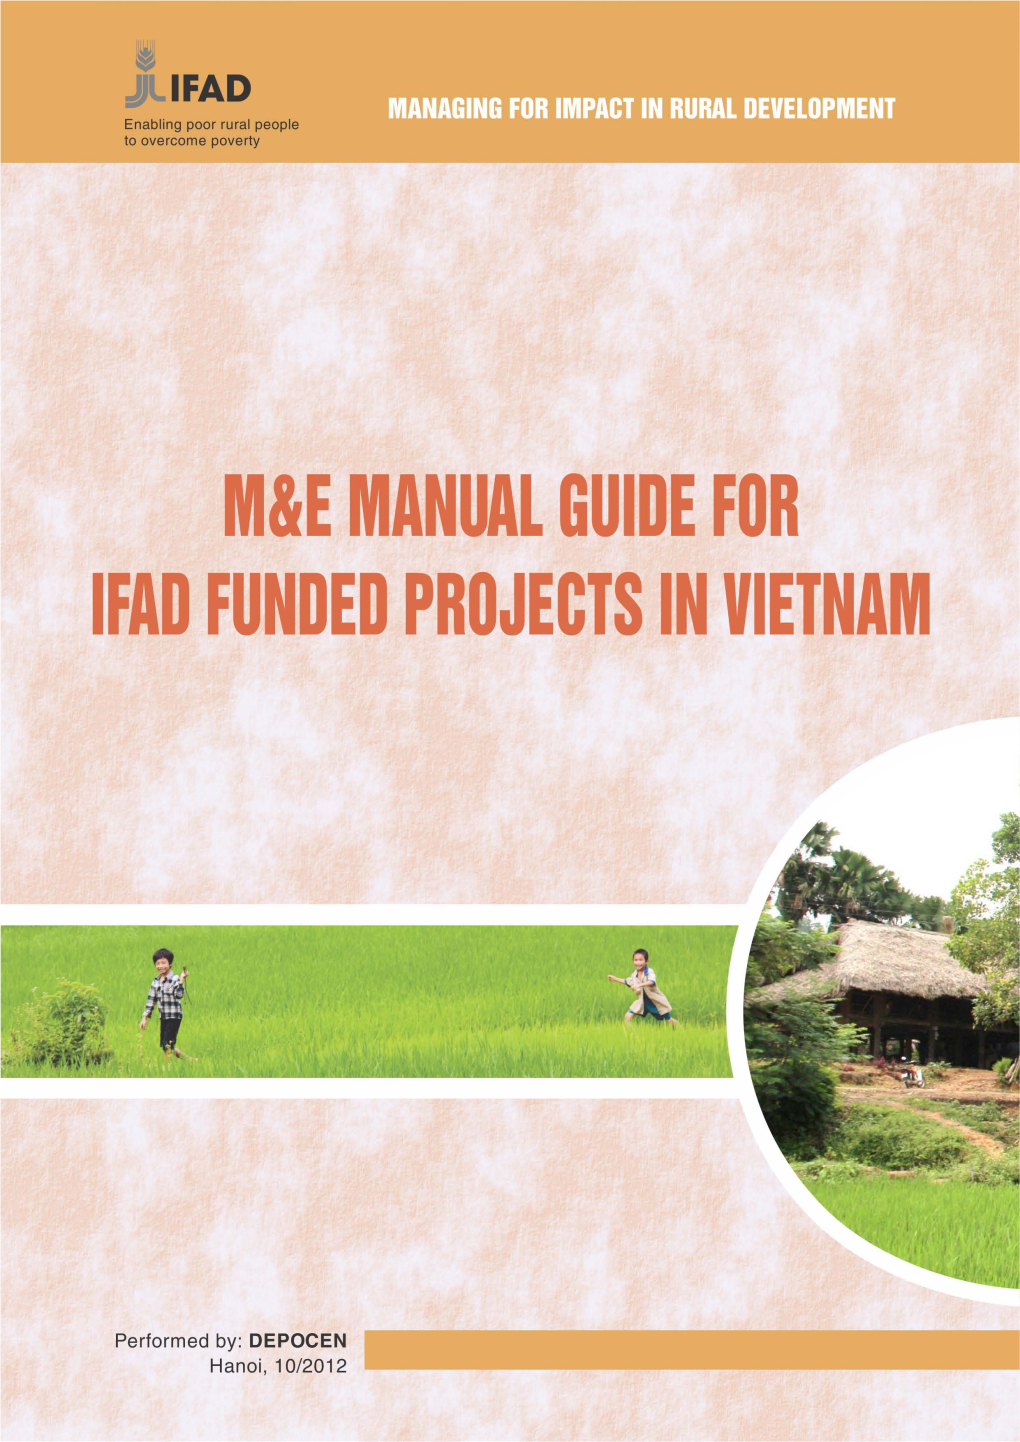 M&E Manual Guide for Ifad Funded Projects in Vietnam